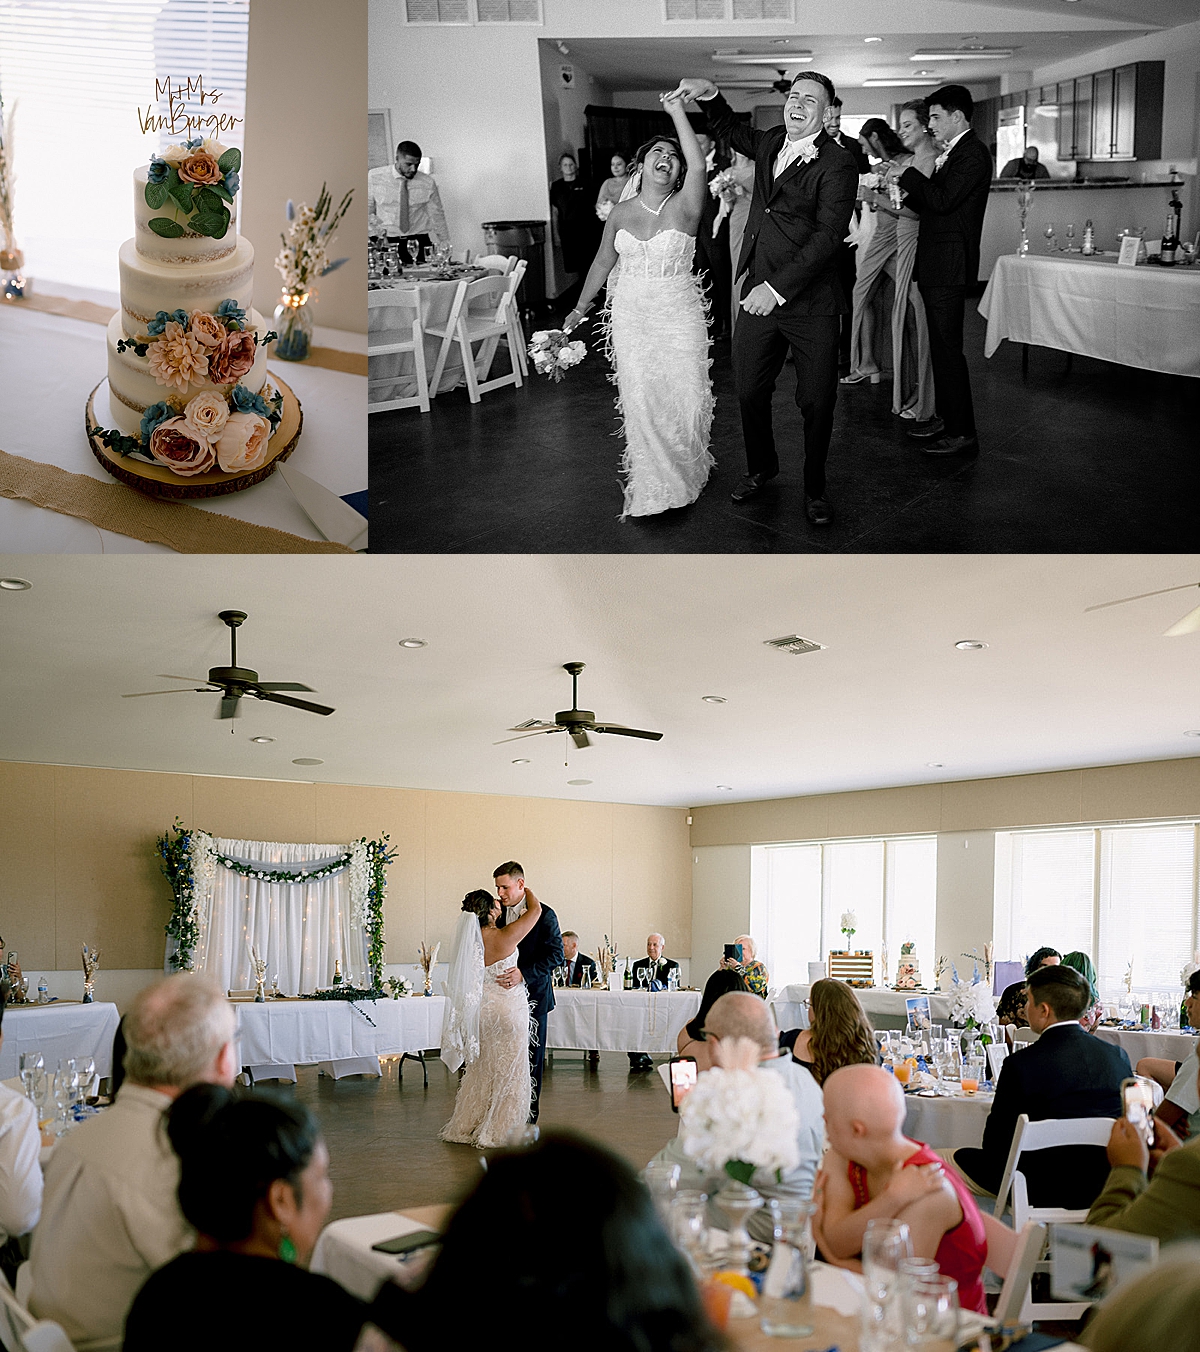 wedding reception cake and first dance from married couple by Emily burns photo 